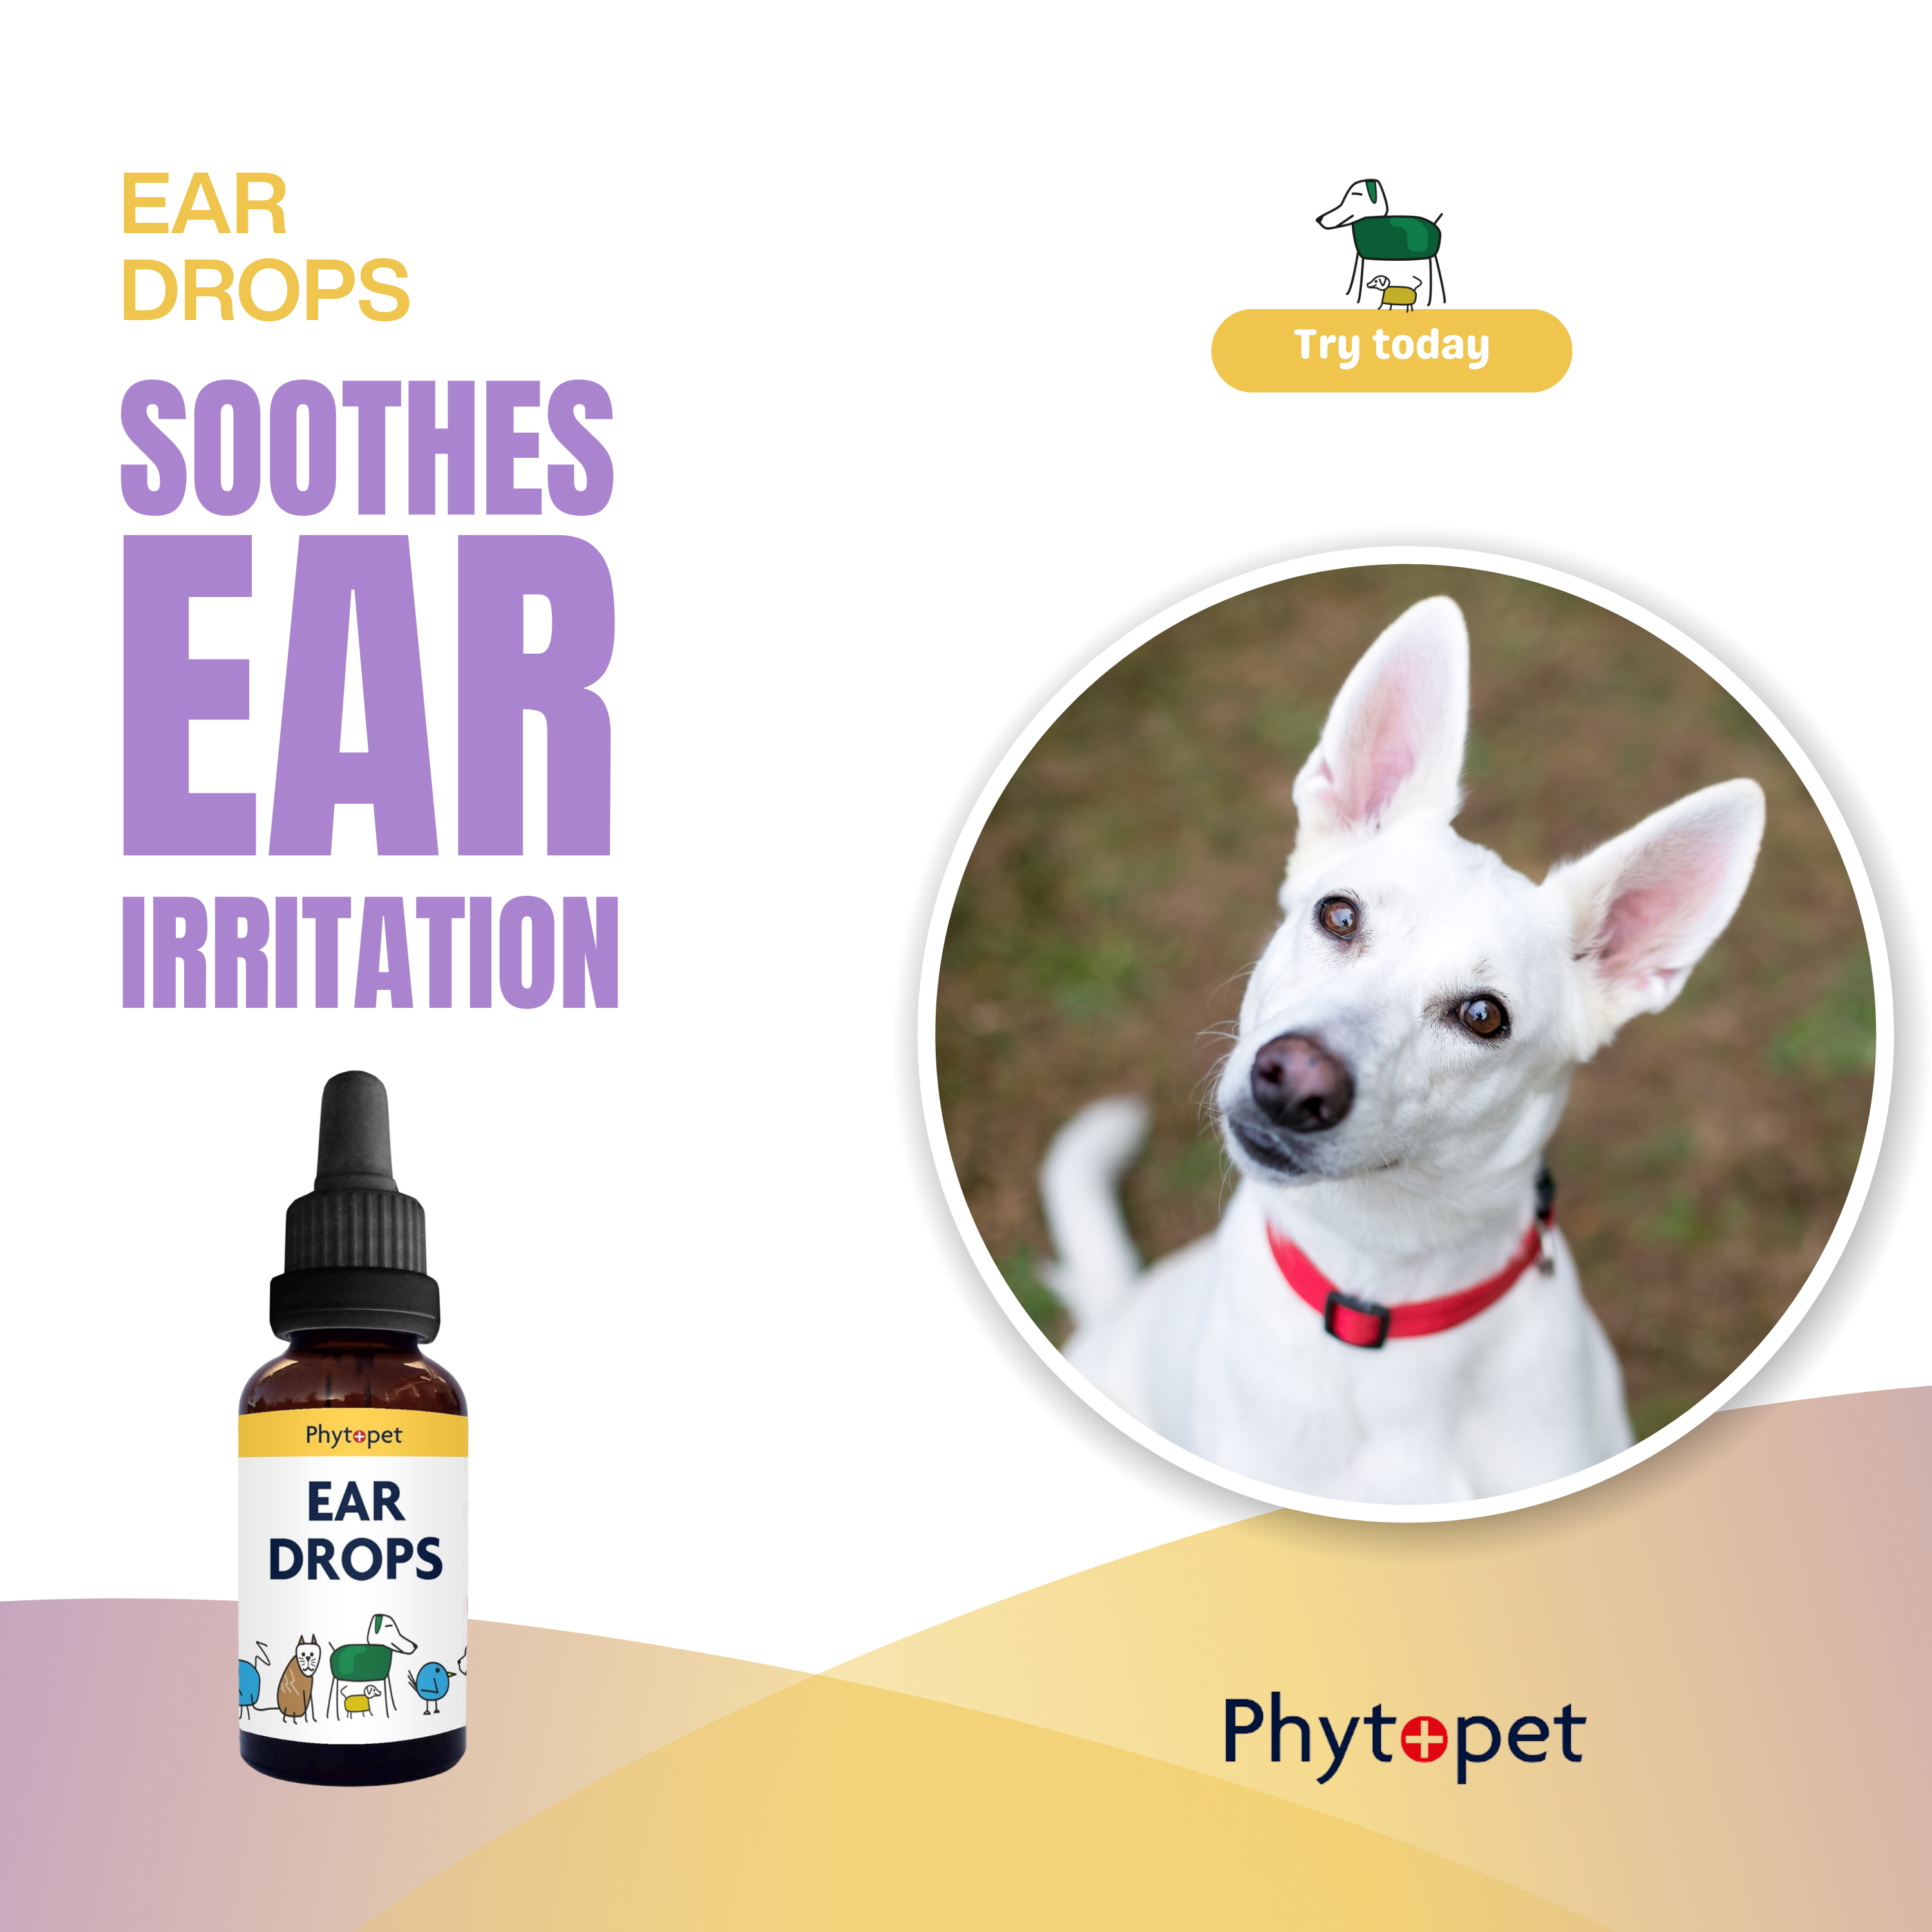 Ear Drops - Herbal oil combination to help soften ear wax, calm irritation and deter mites.